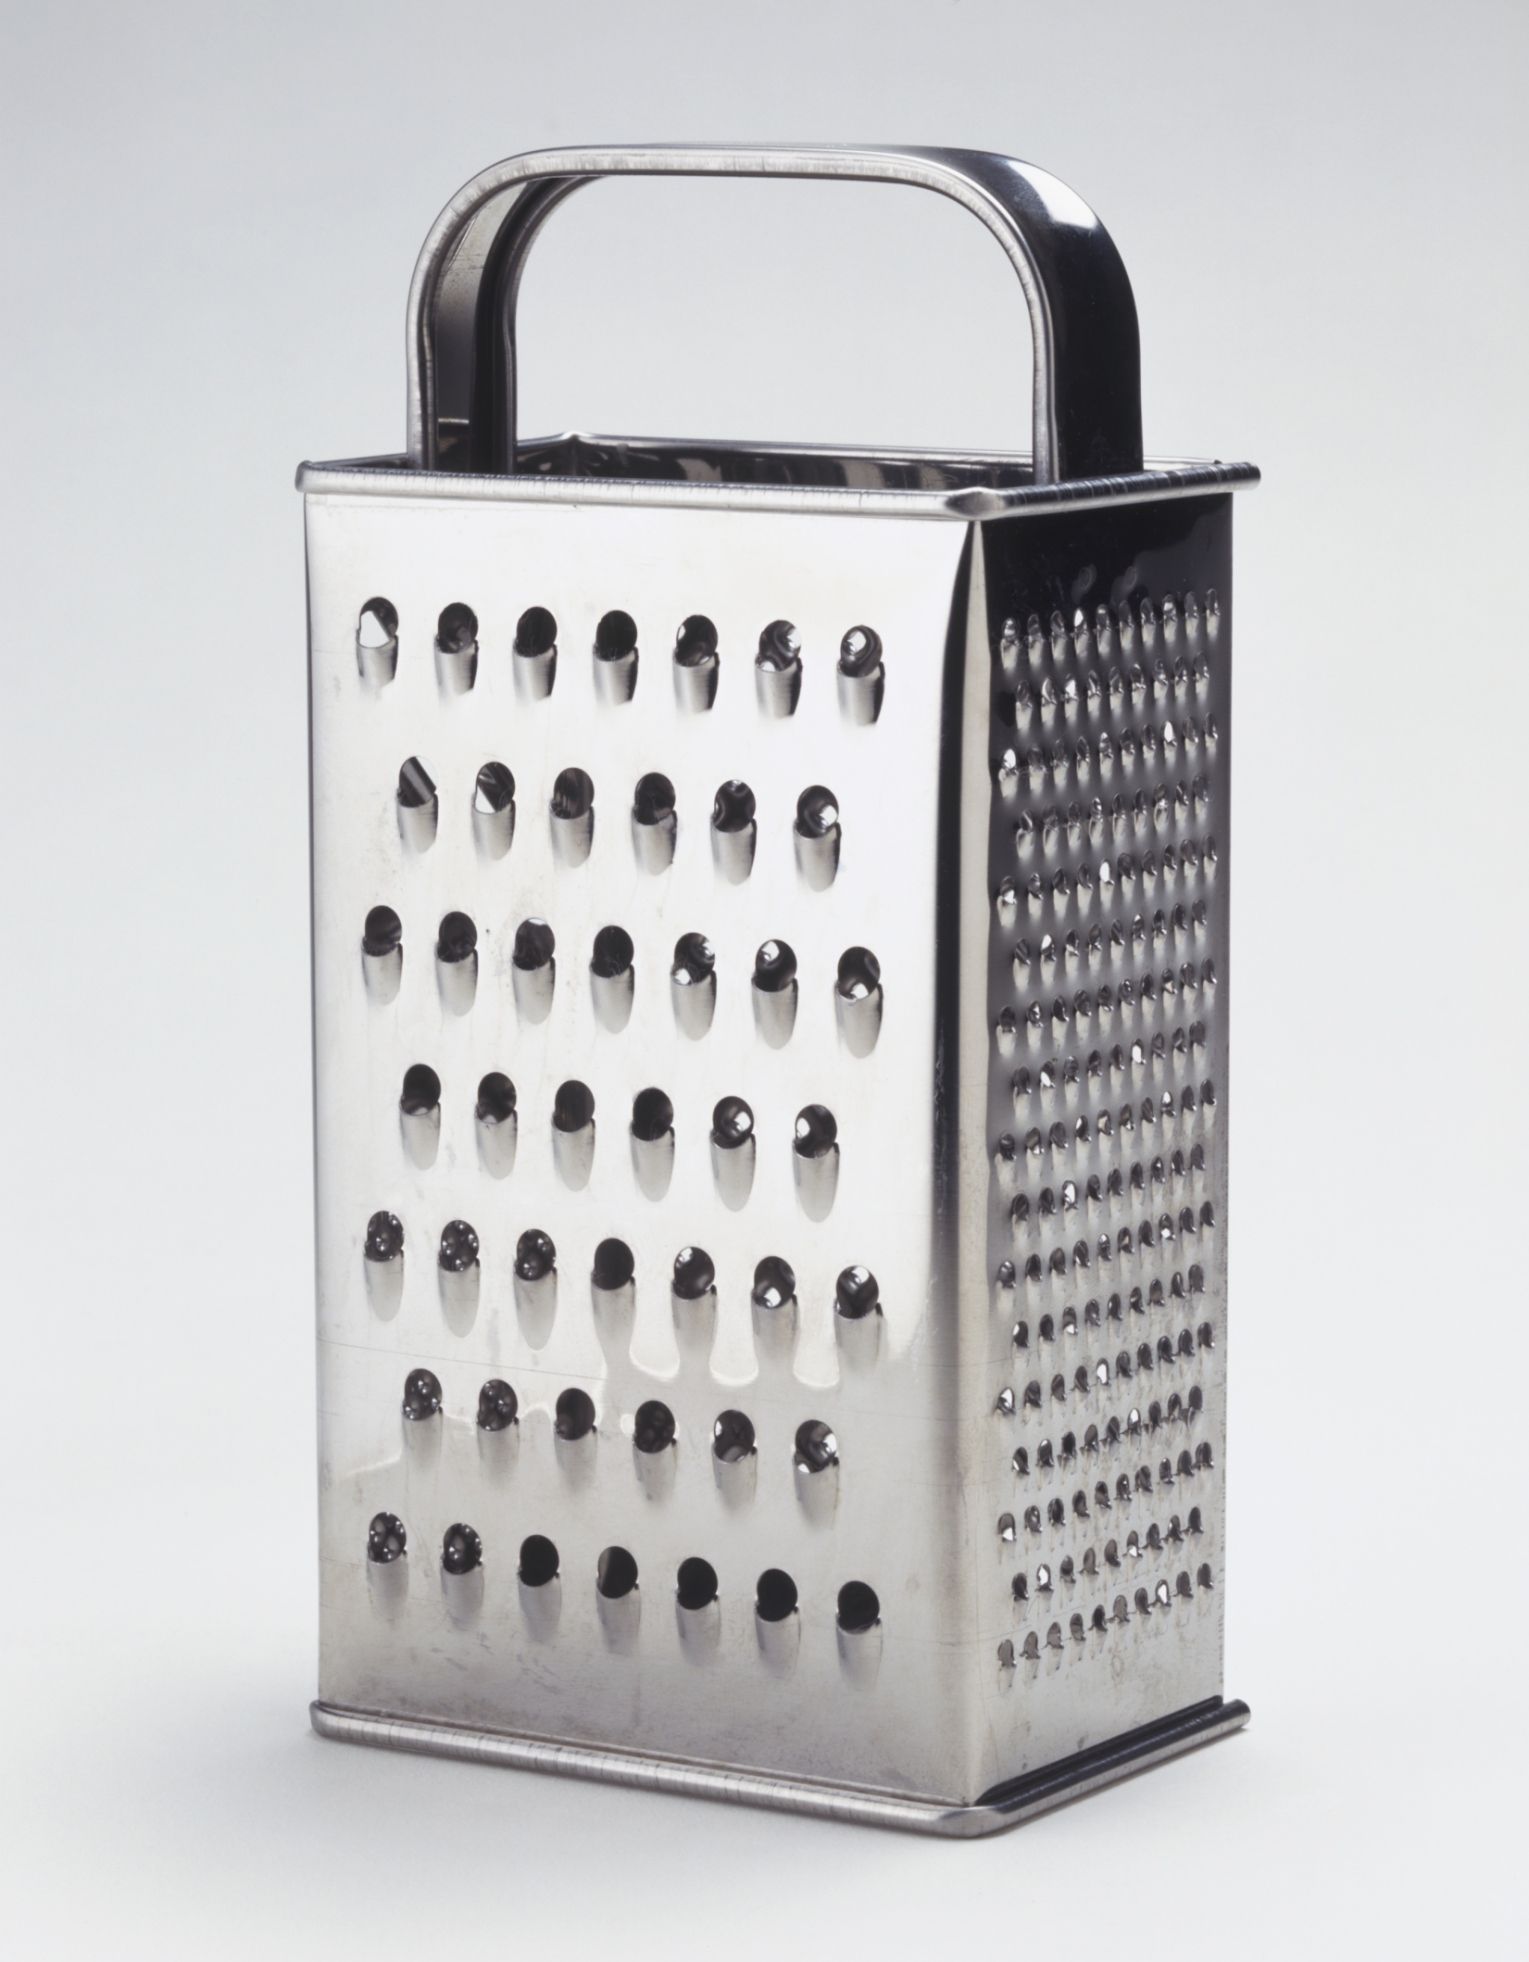 Cheese Grater Overview Of The Best Cheese Graters.